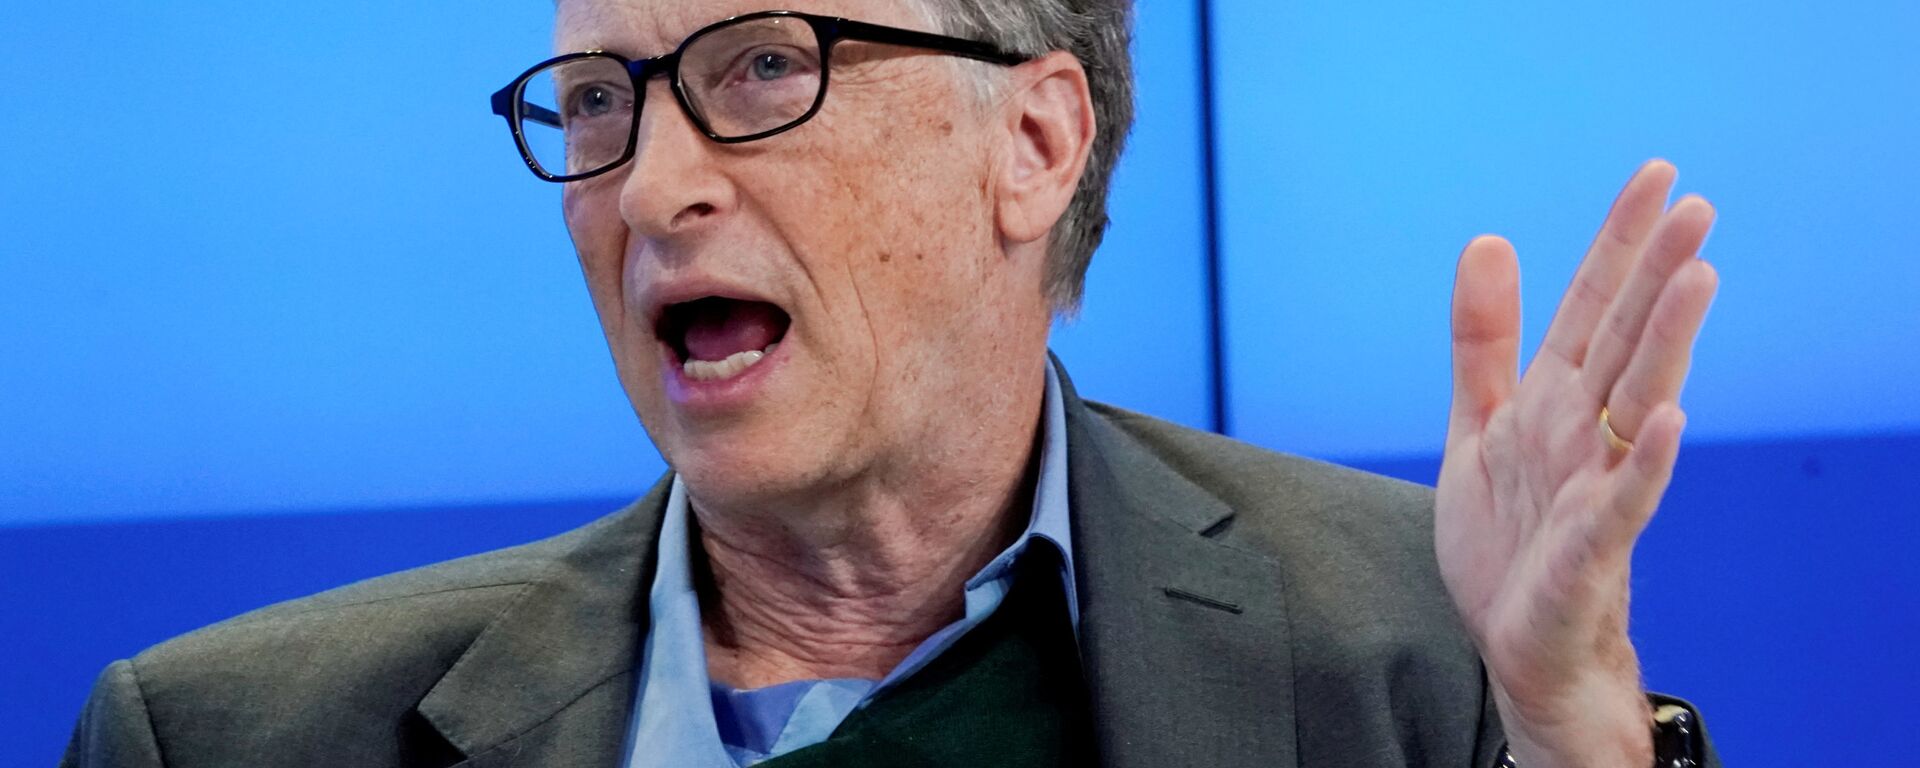  Bill Gates, Co-Chair of Bill & Melinda Gates Foundation, gestures as he speaks during the World Economic Forum (WEF) annual meeting in Davos, Switzerland January 25, 2018 - Sputnik International, 1920, 17.05.2021